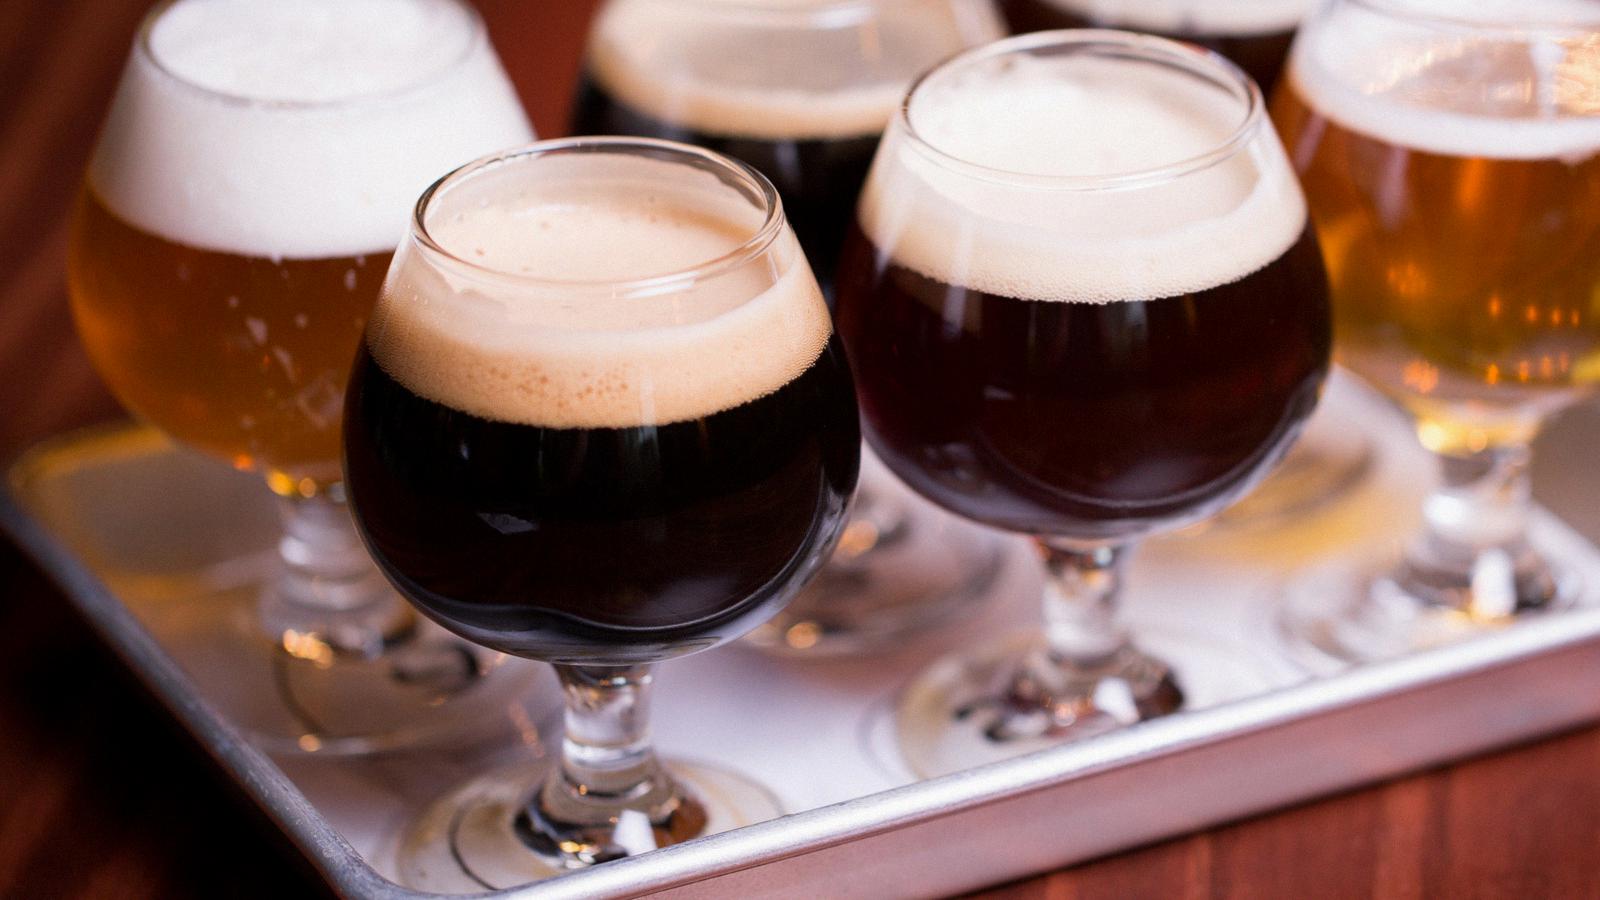 What Are The Differences Between Stout And Porter